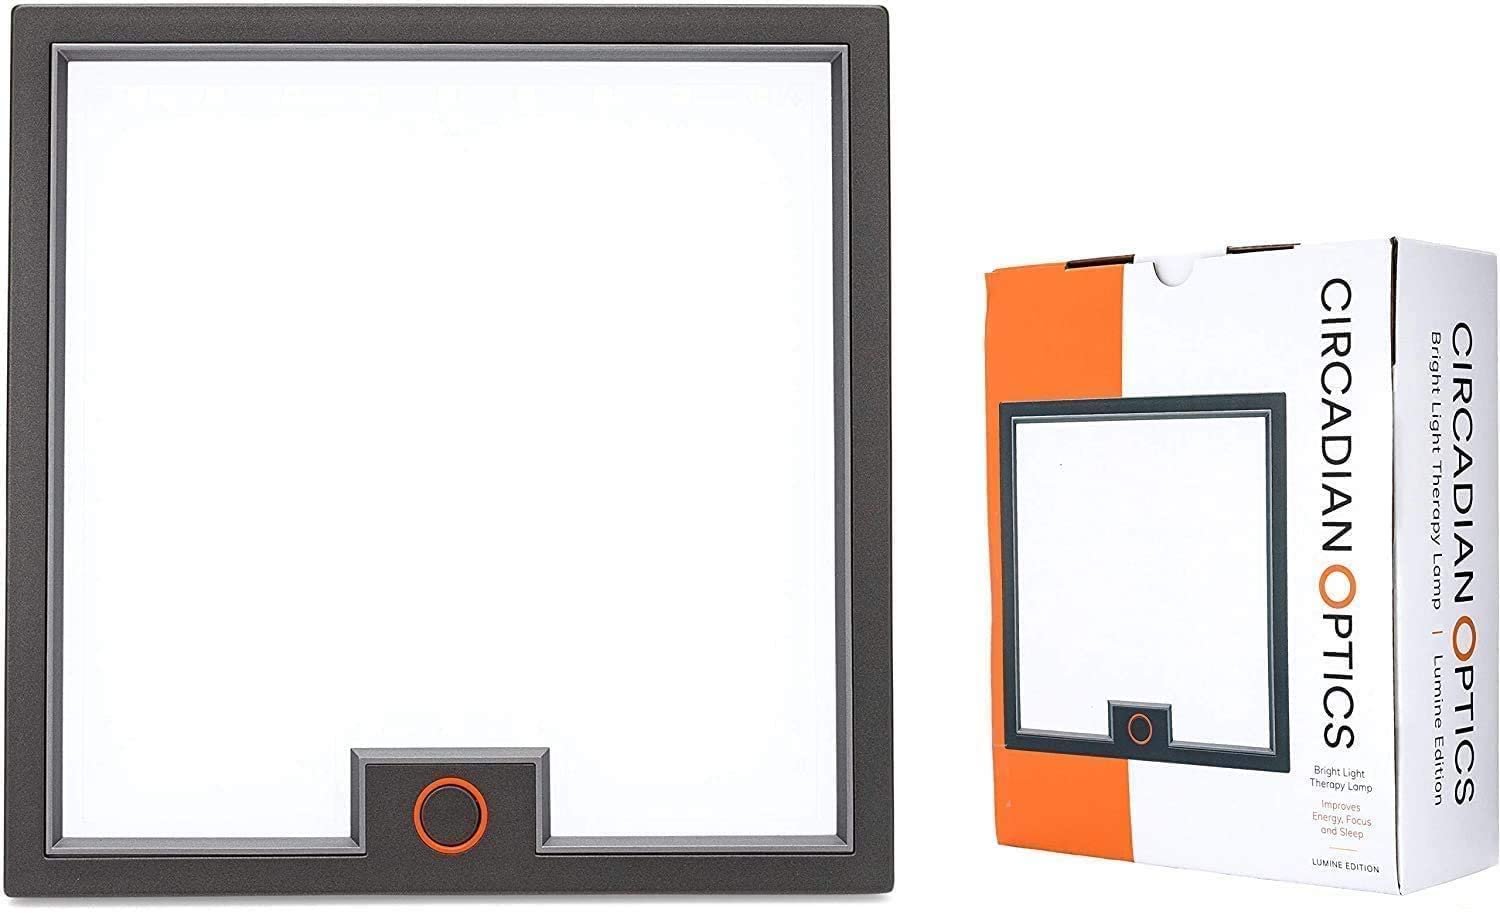 Circadian optics light therapy lamp, which is a white square flat light with a black frame.